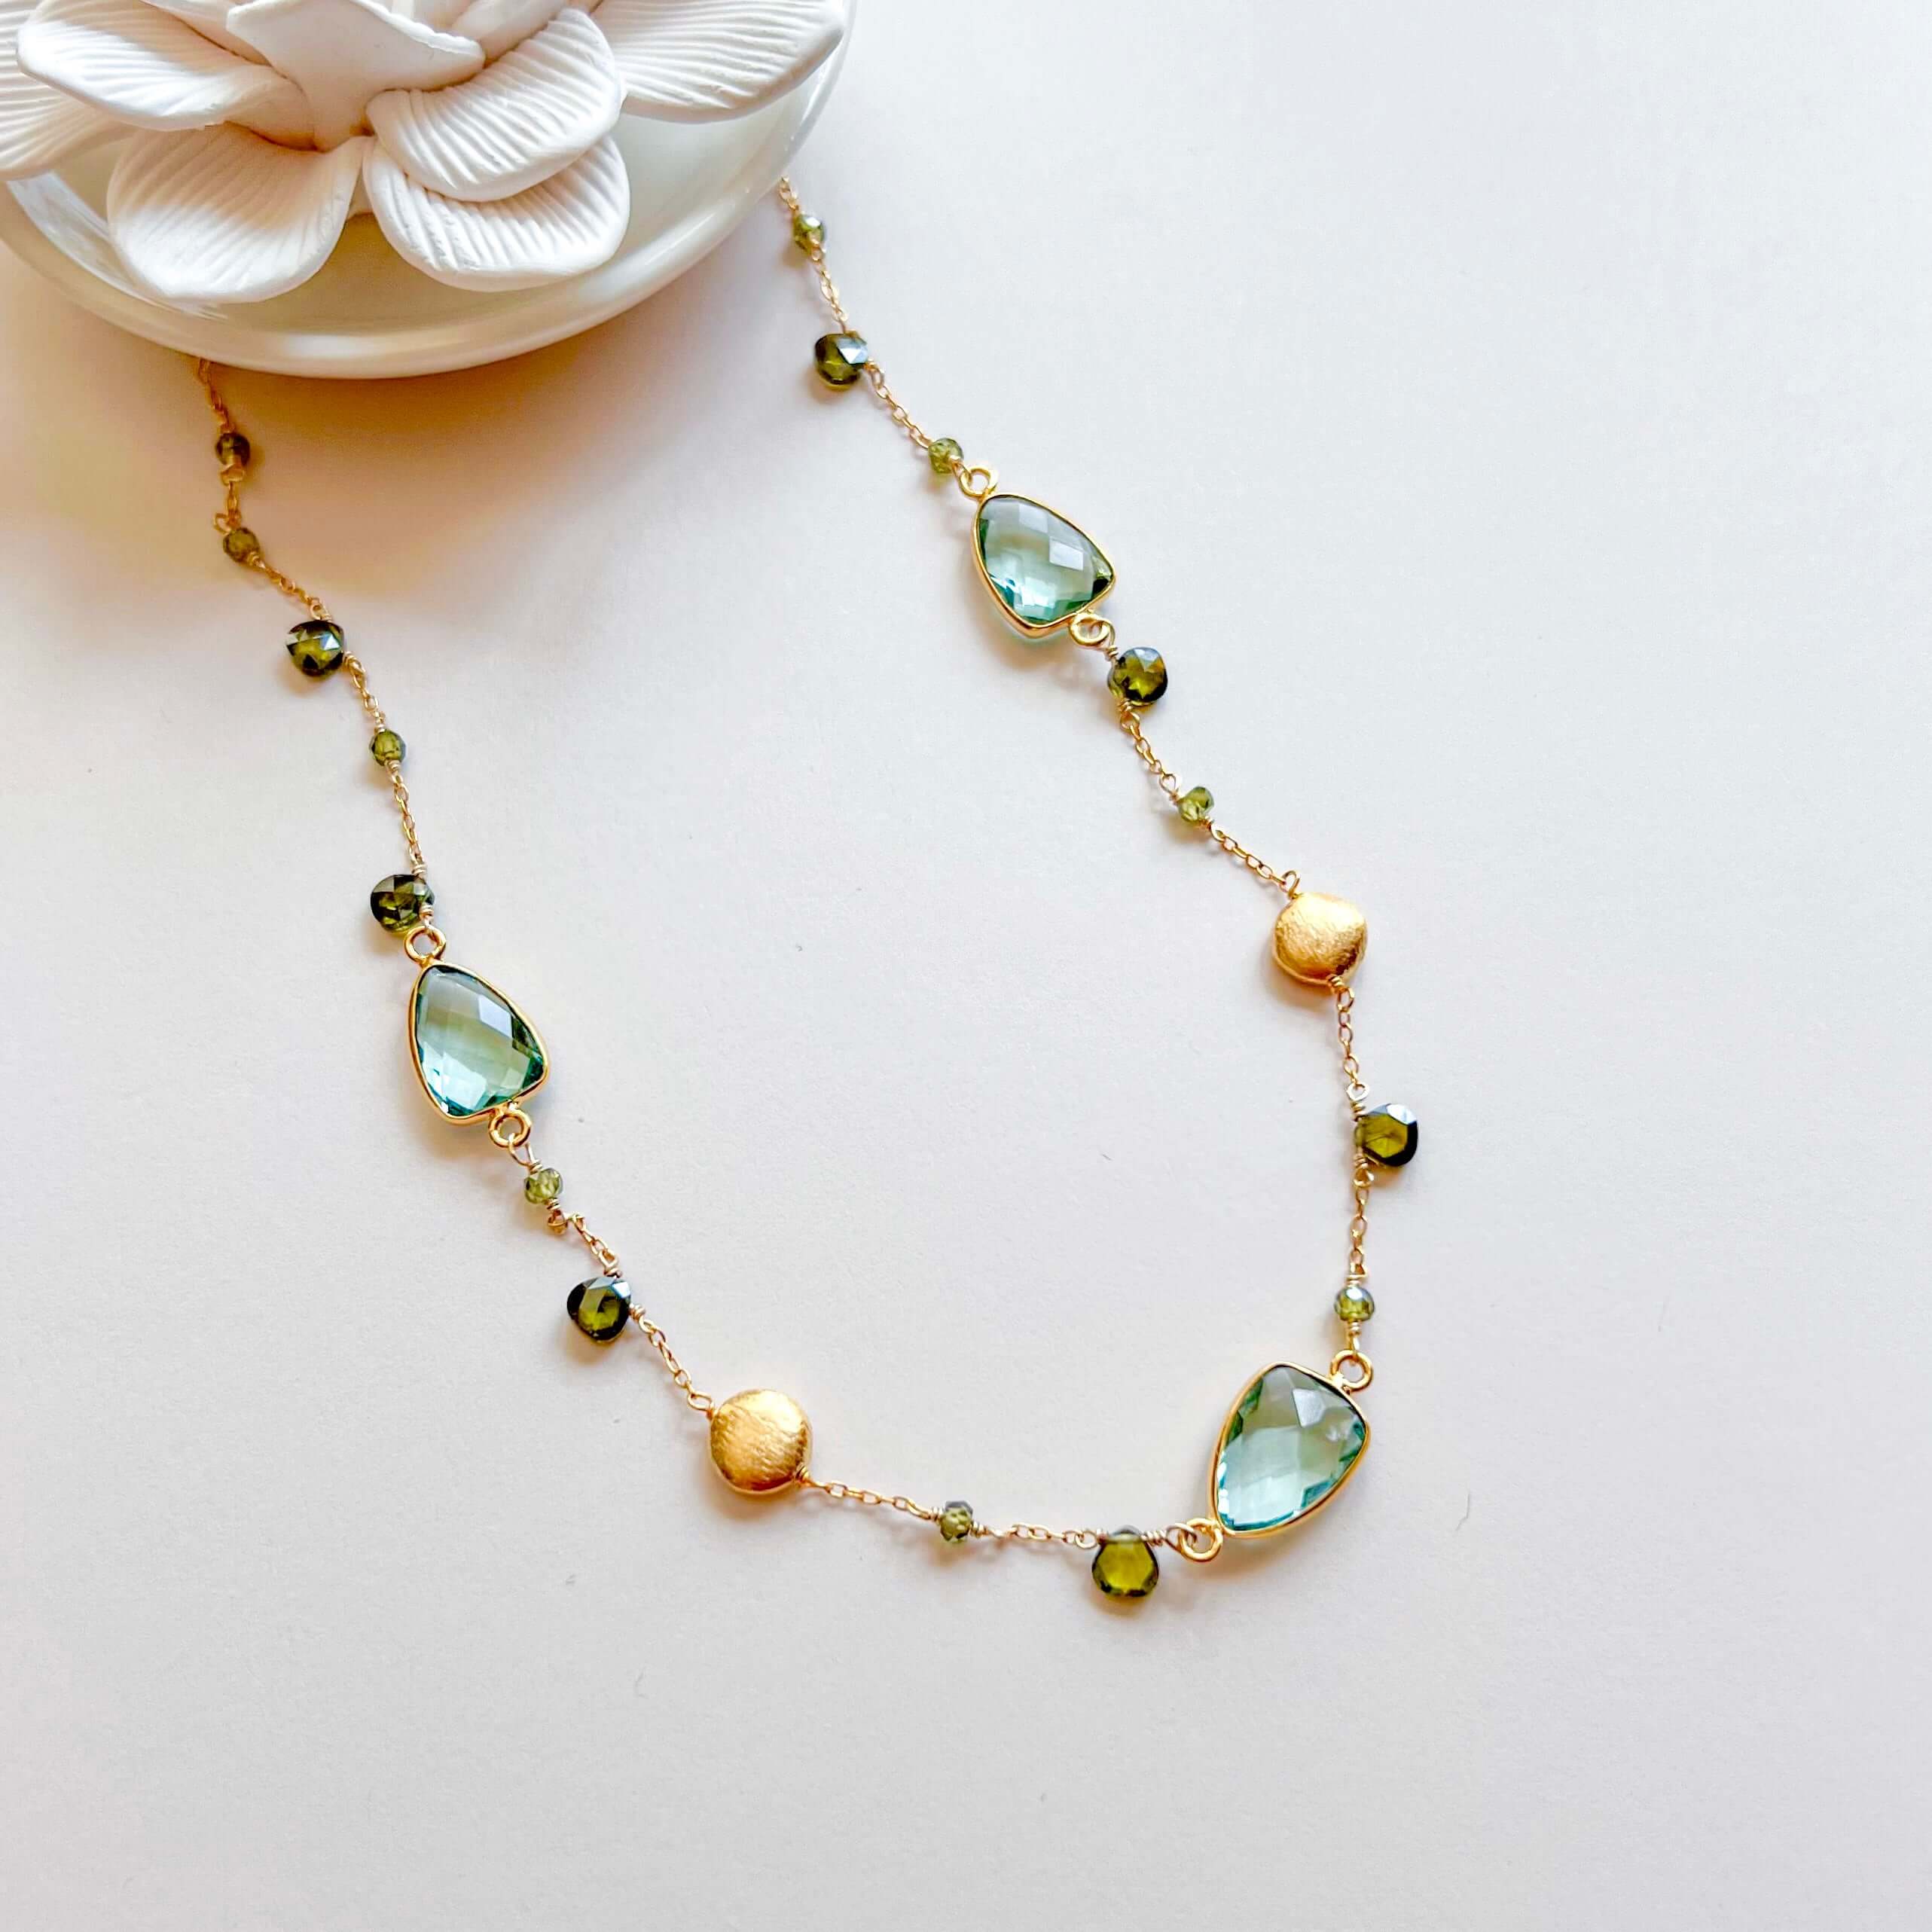 Exquisite Green Amethyst Gold Bezel Necklace with Forest Green Peridot Accents.